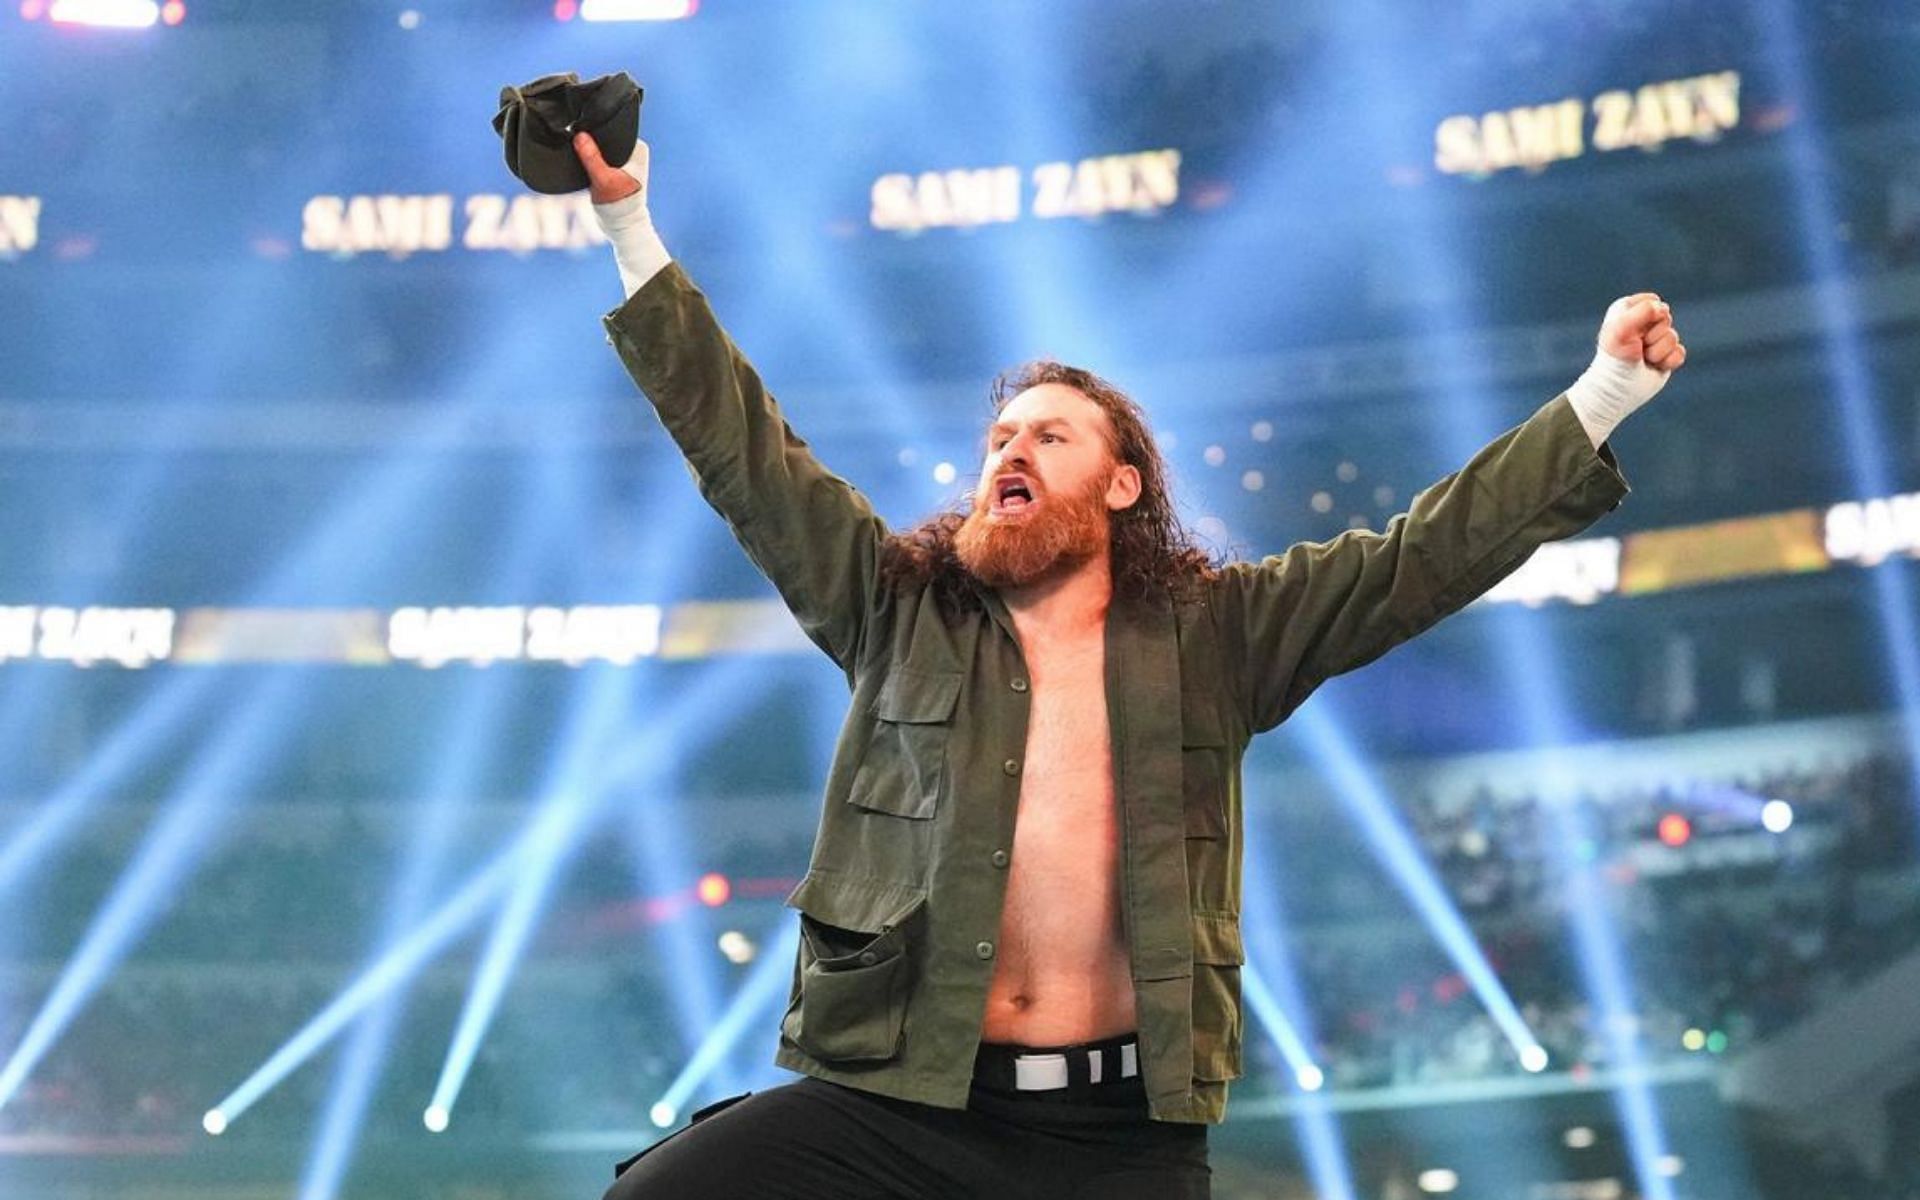 Sami Zayn has been dubbed as one of the most versatile superstars in WWE